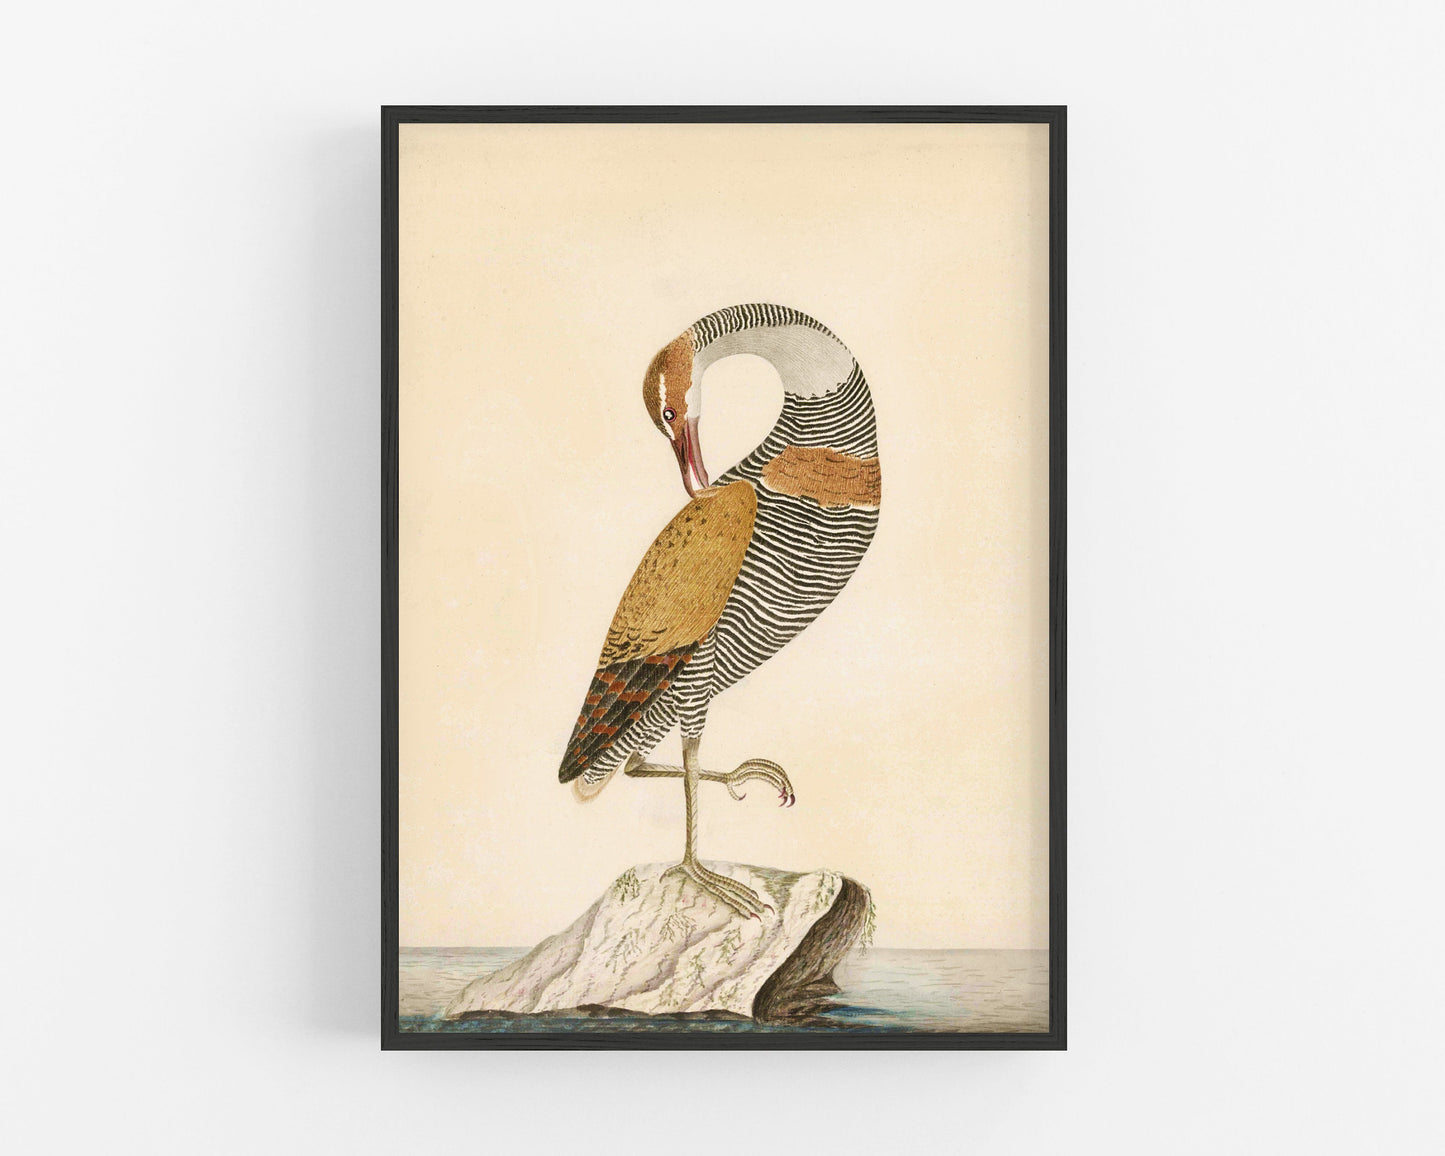 Antique water bird art | 18th century aviary illustration | Natural history print | Animal décor | Modern vintage | Eco-friendly gift